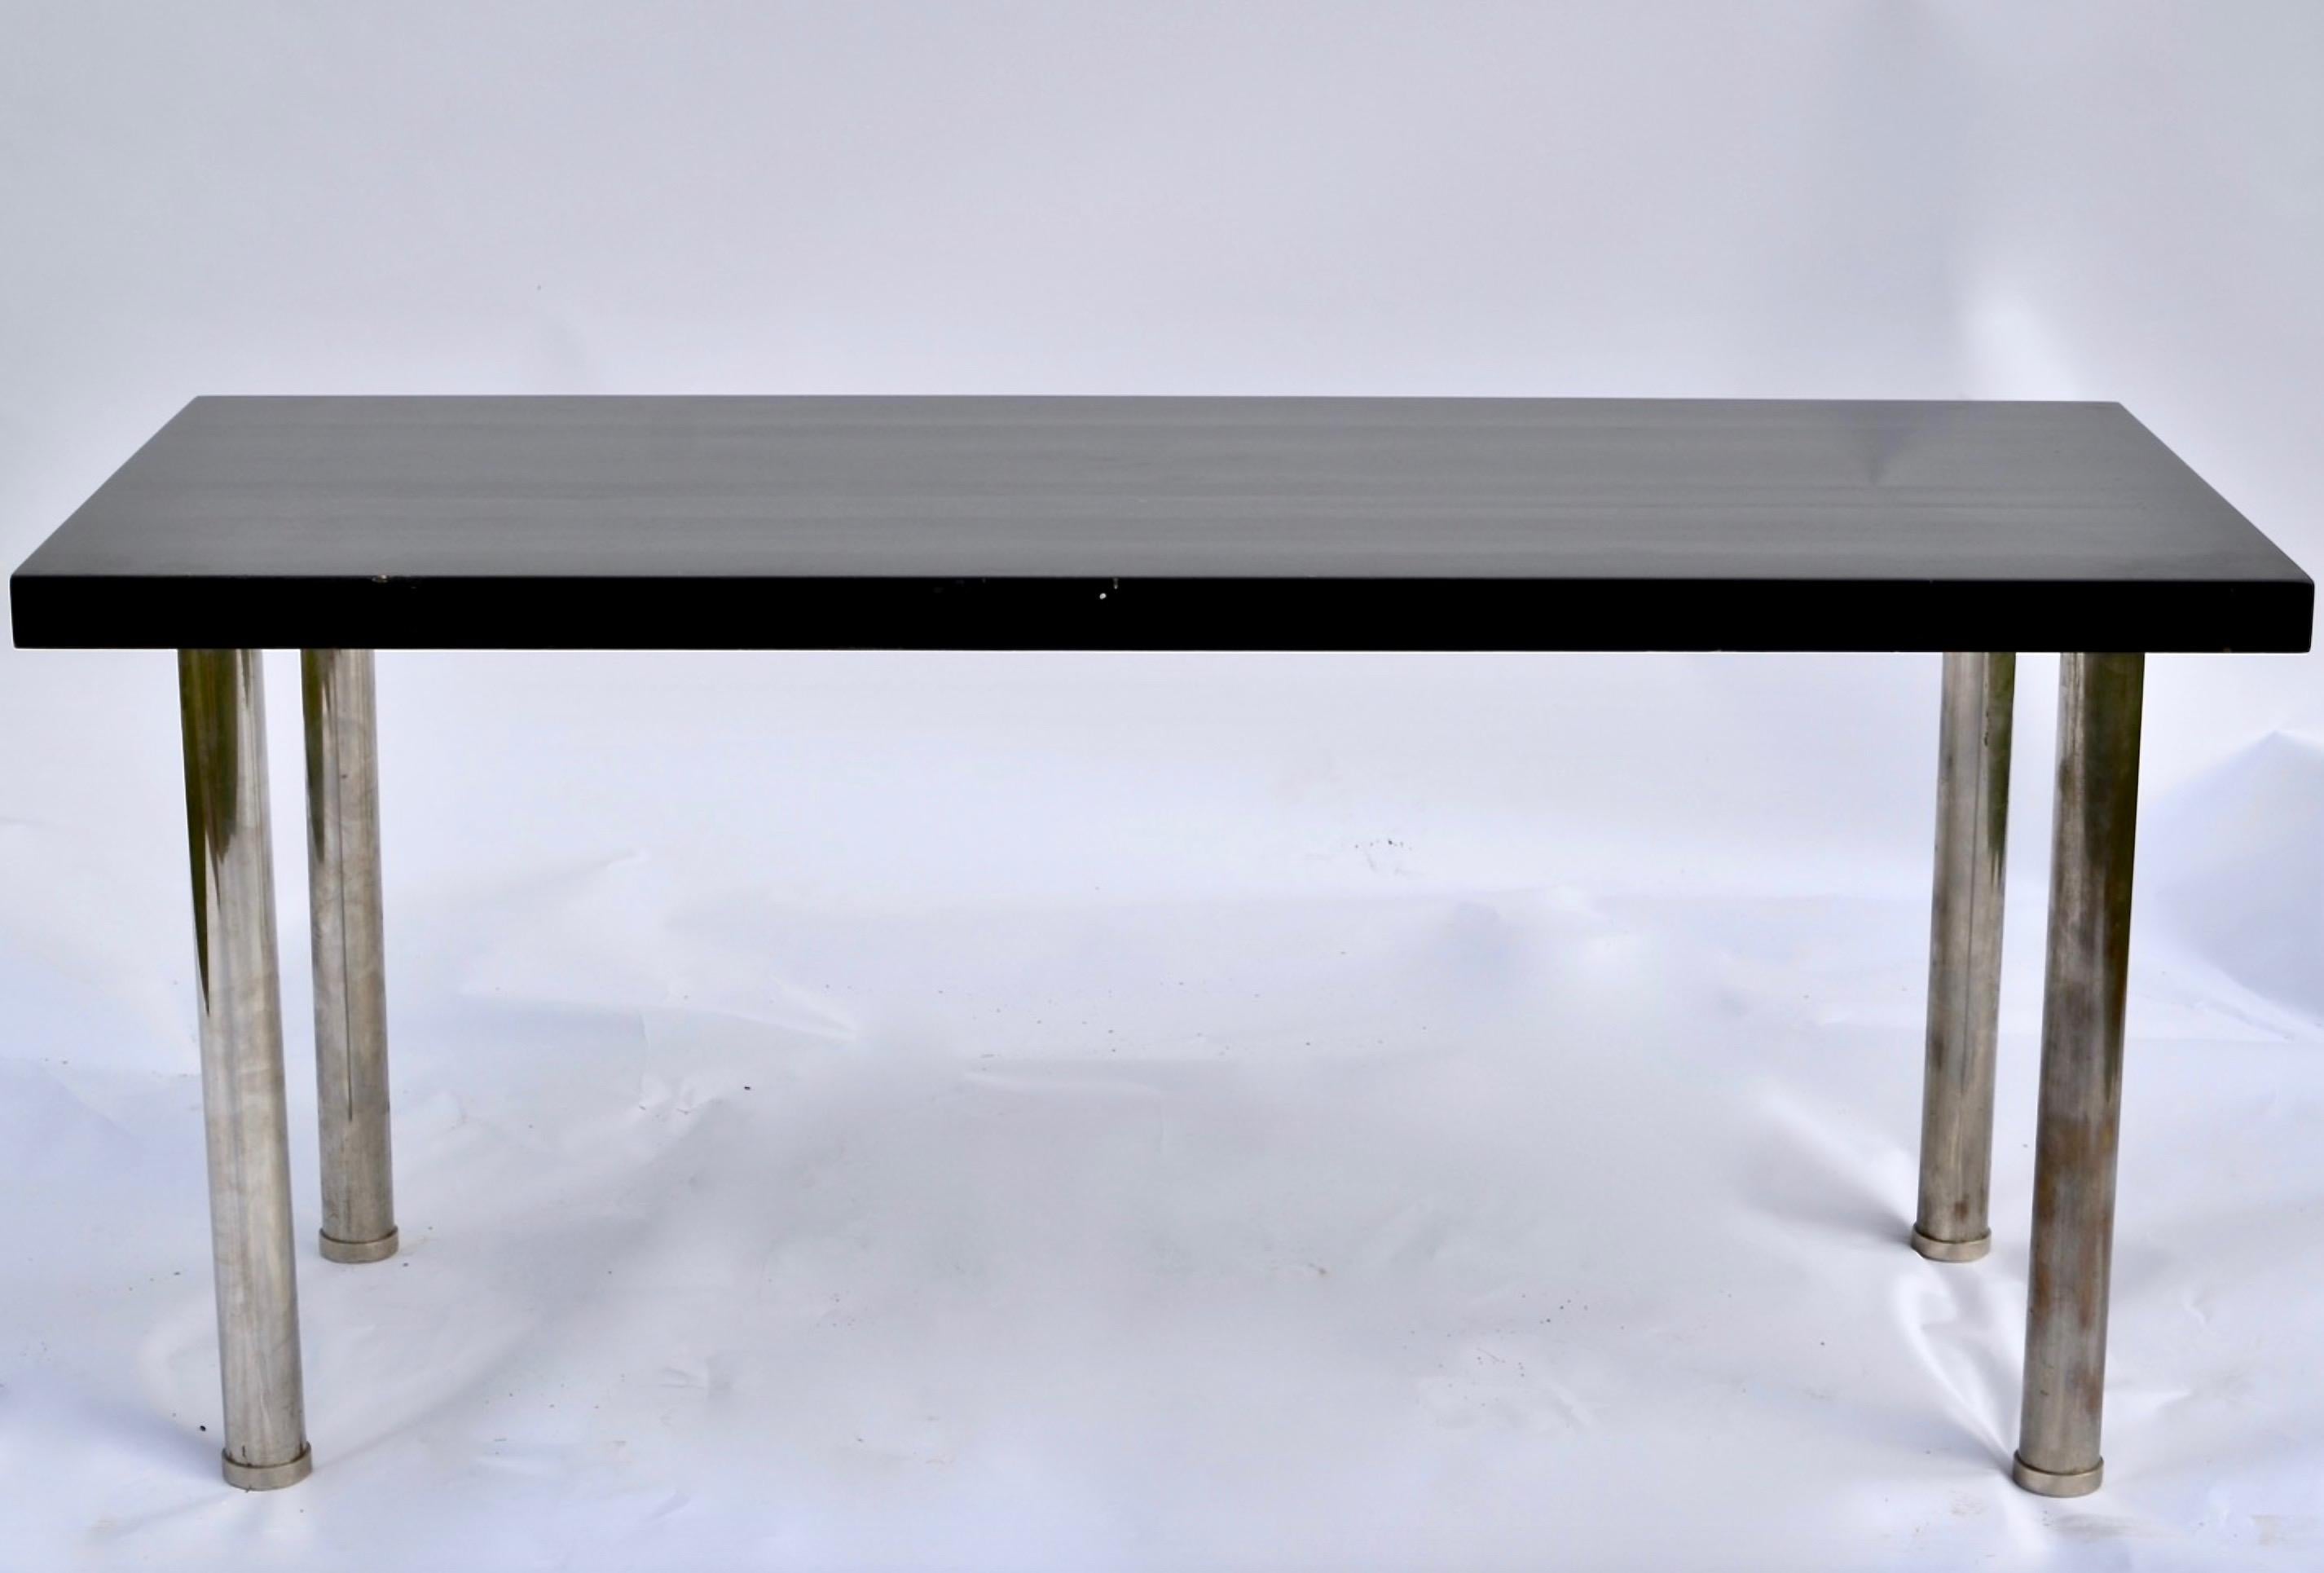 A Swedish Art Deco table with a brass plate “Nordiska Kompaniet, Stockholm”. Numbered and made in 1932. Legs chromed and the tabletop black lacquered.

Dimensions: Length 150.0 cm (59.1 inches) x depth 63.0 cm (24.8 inches) x height 67.0 cm (26.4